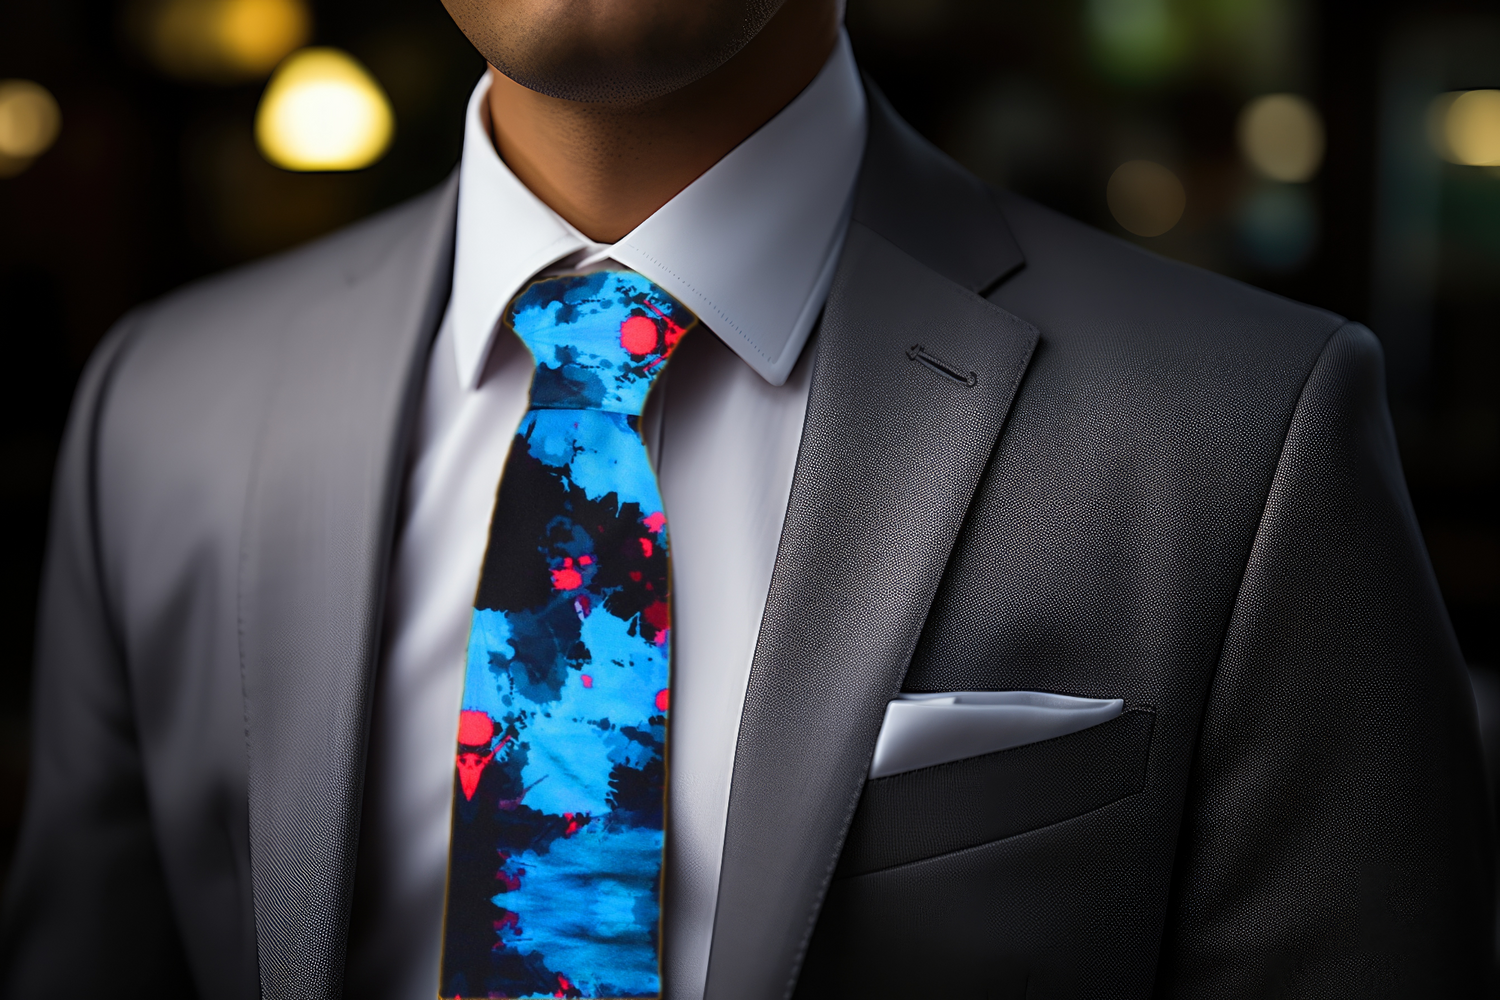 Black Blue and Red Abstract ink Blot Necktie Grey Suit